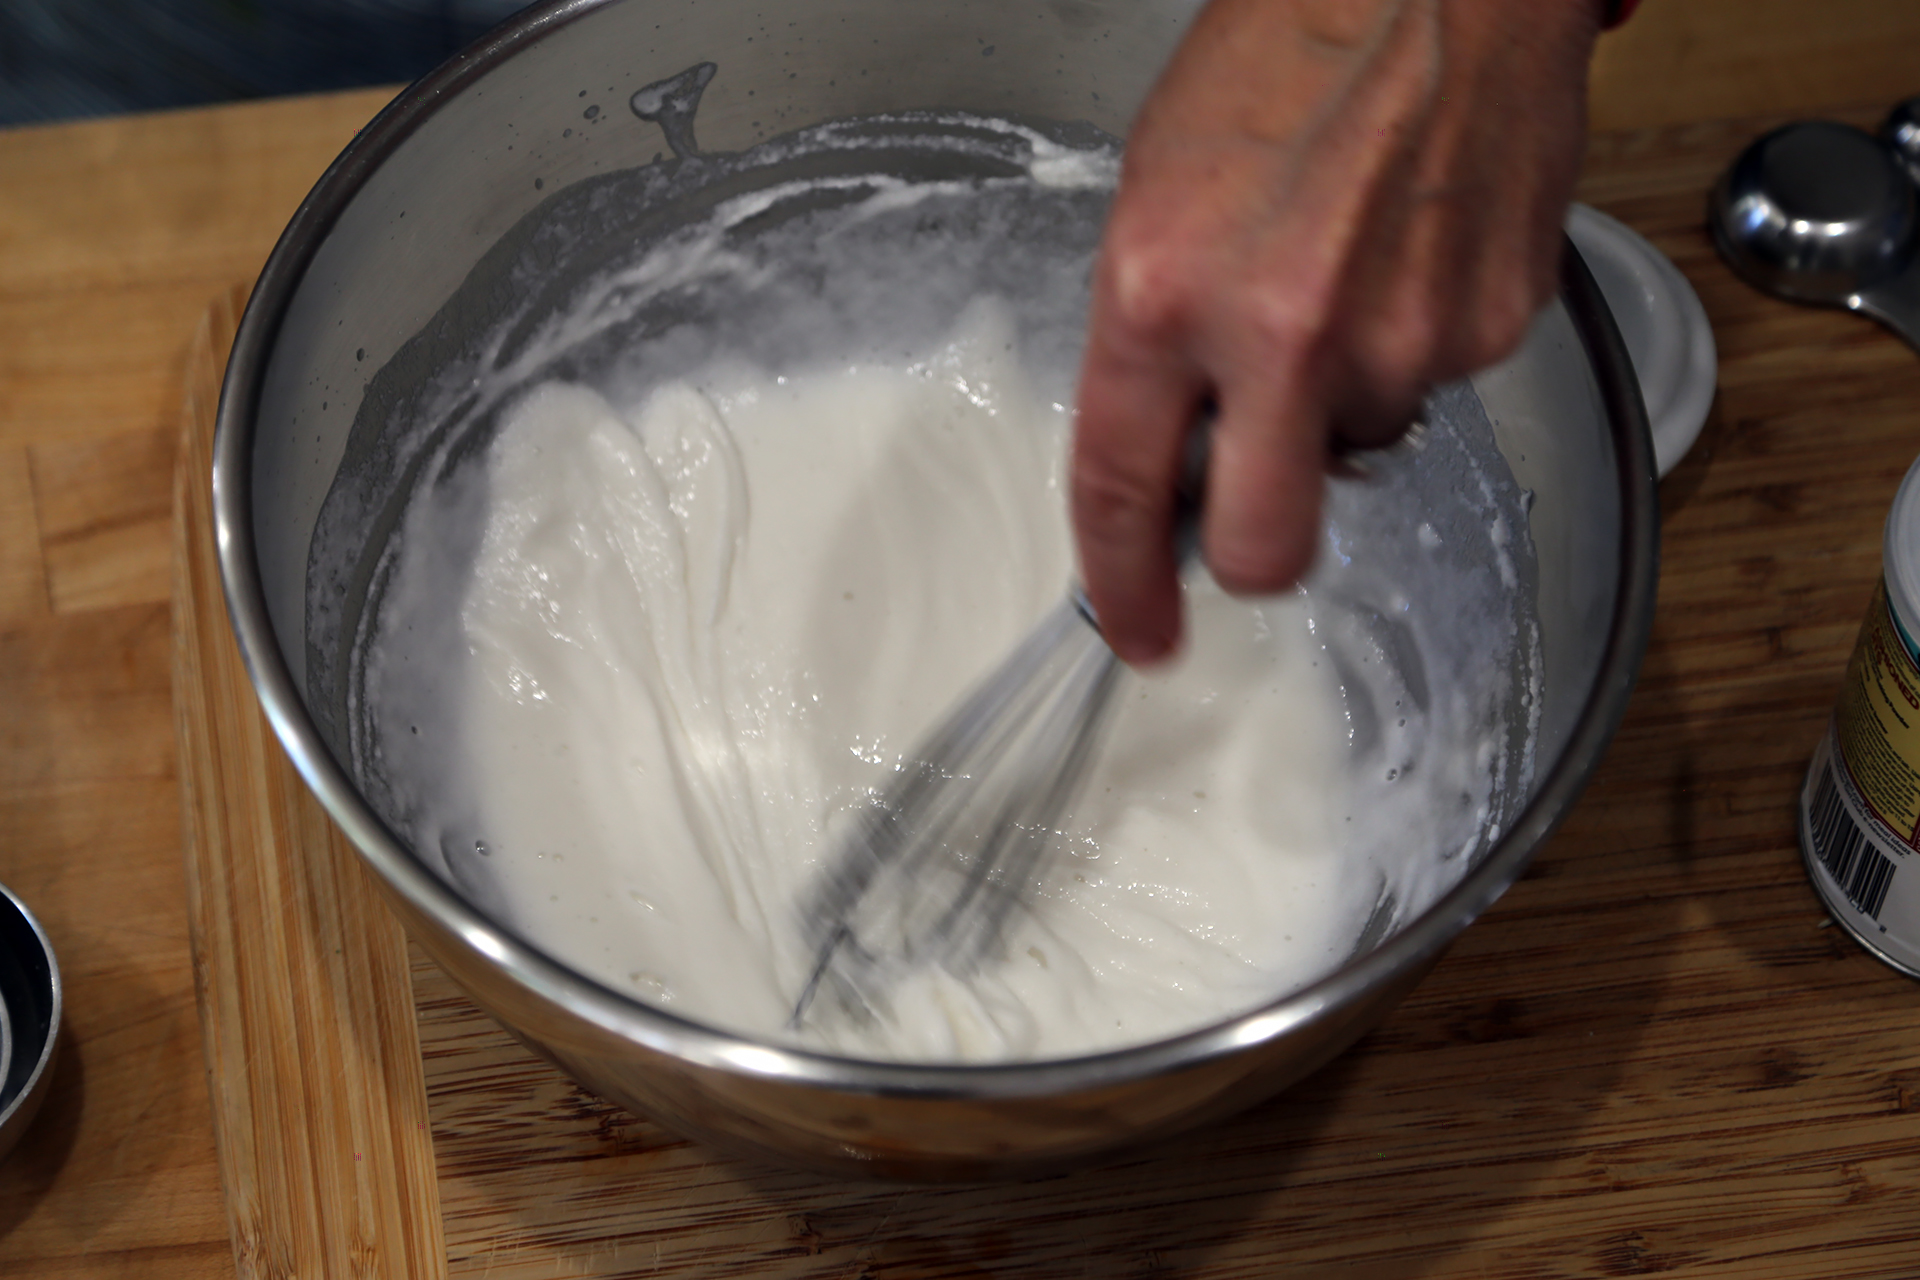 The batter should have a smooth consistency.